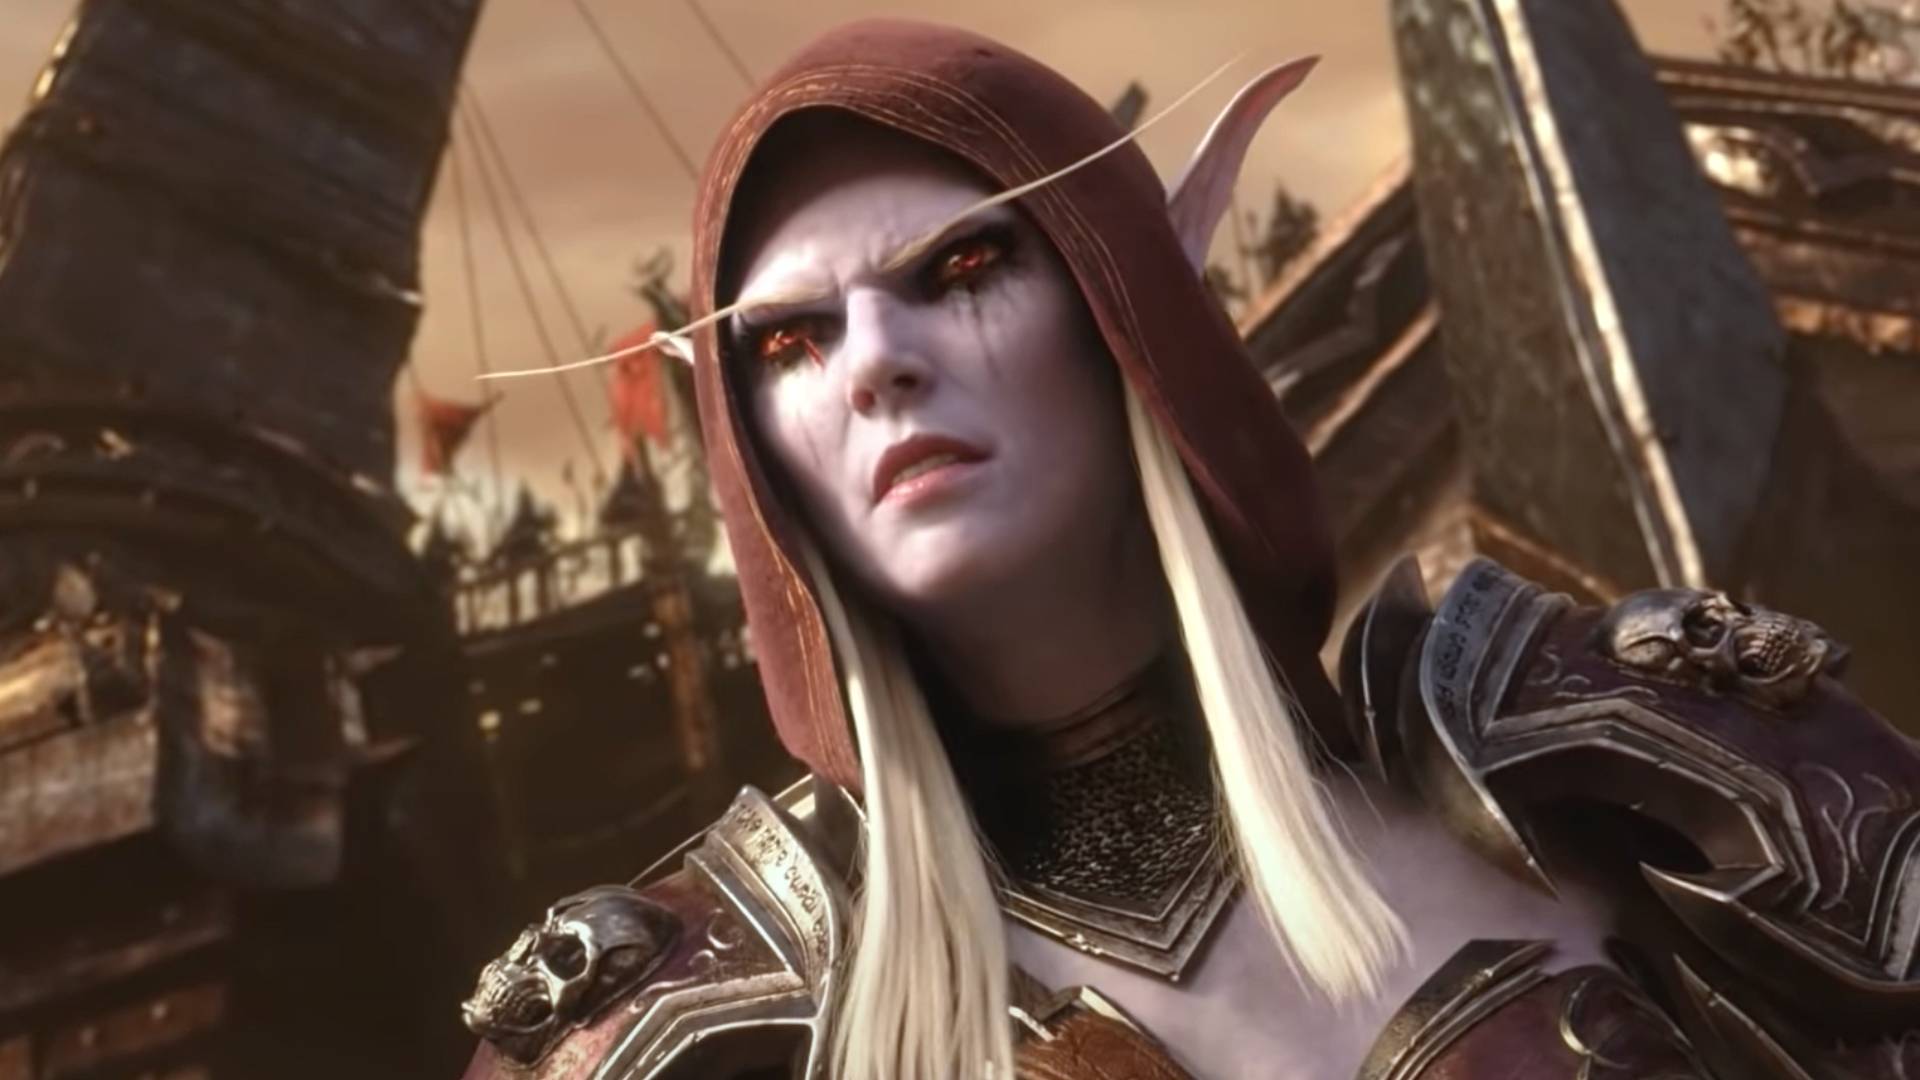 Sylvanas Windrunner is back in WoW, but not how you expect